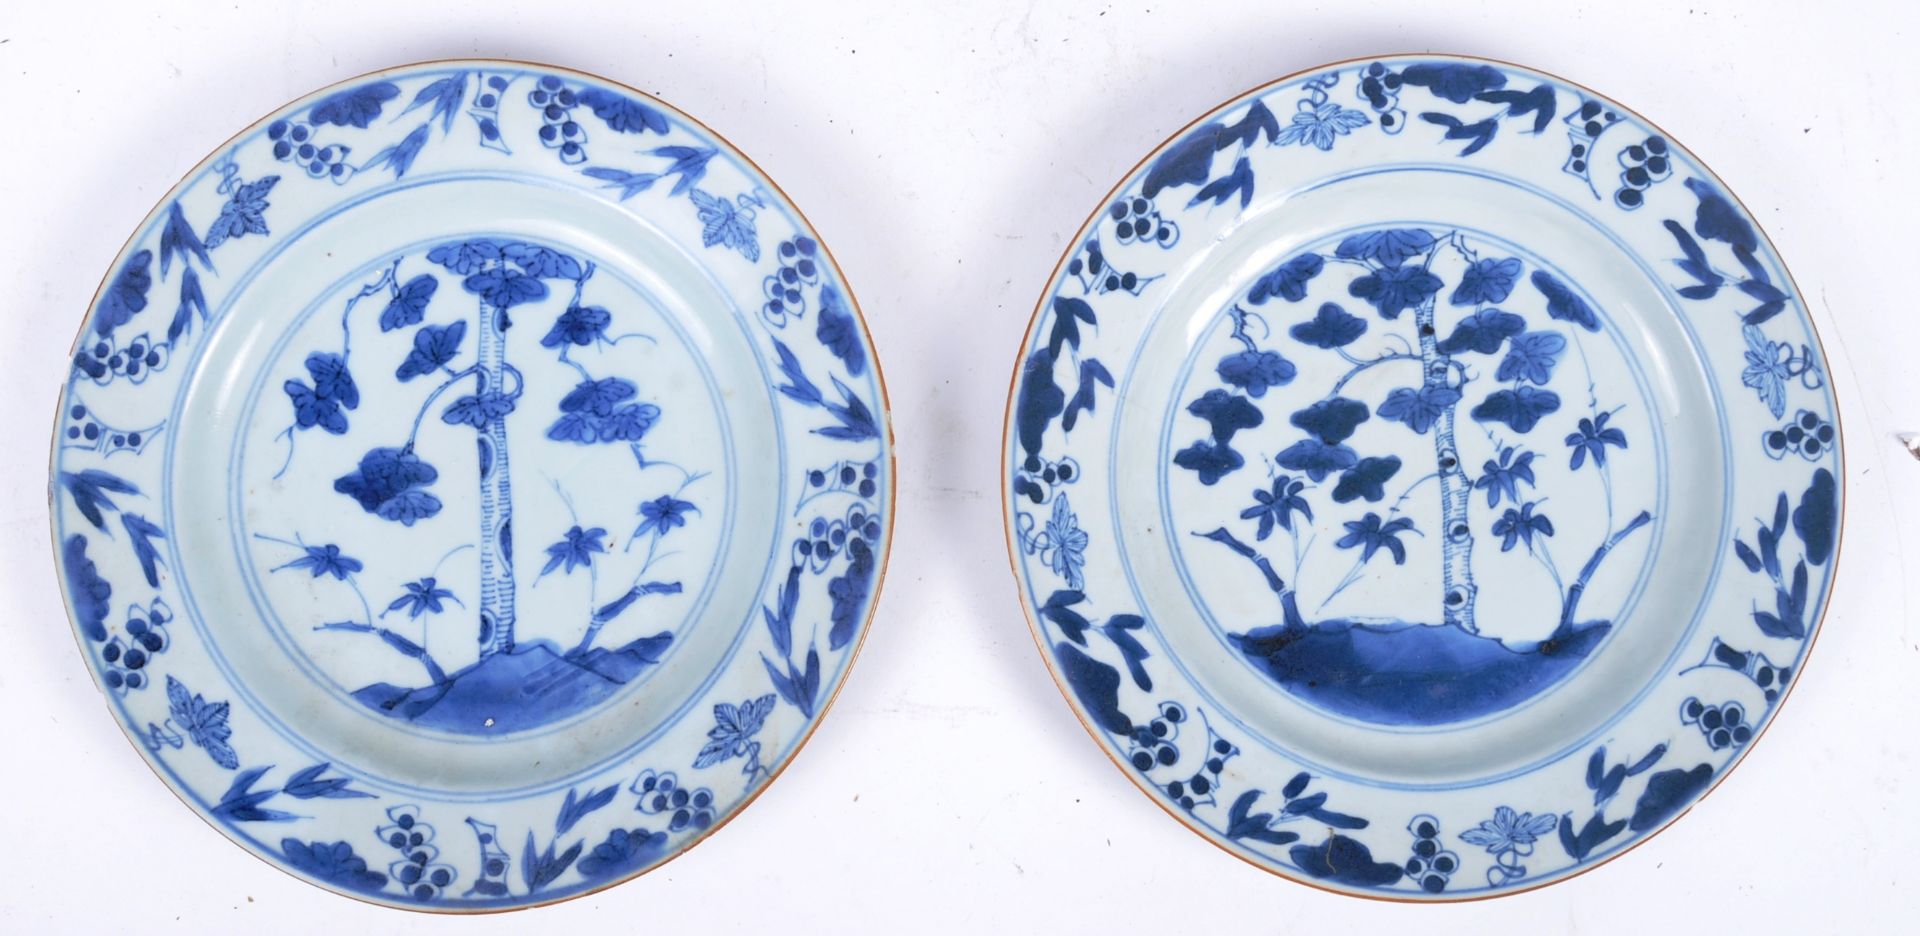 THREE 19TH CENTURY QING DYNASTY PORCELAIN & CERAMIC ITEMS - Image 3 of 9